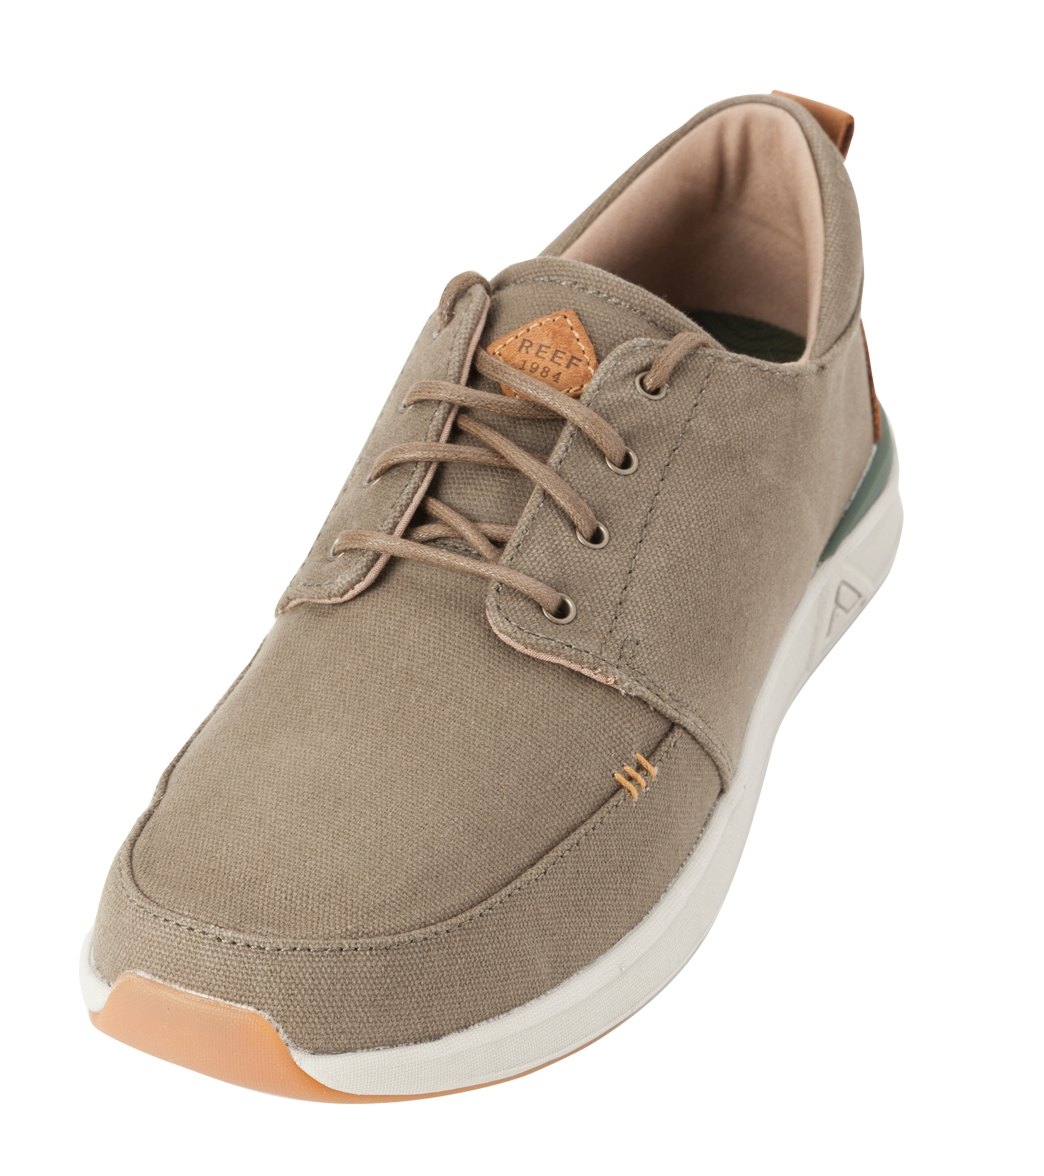 Reef Men's Rover Low Tx Shoes - Military Green 8 - Swimoutlet.com